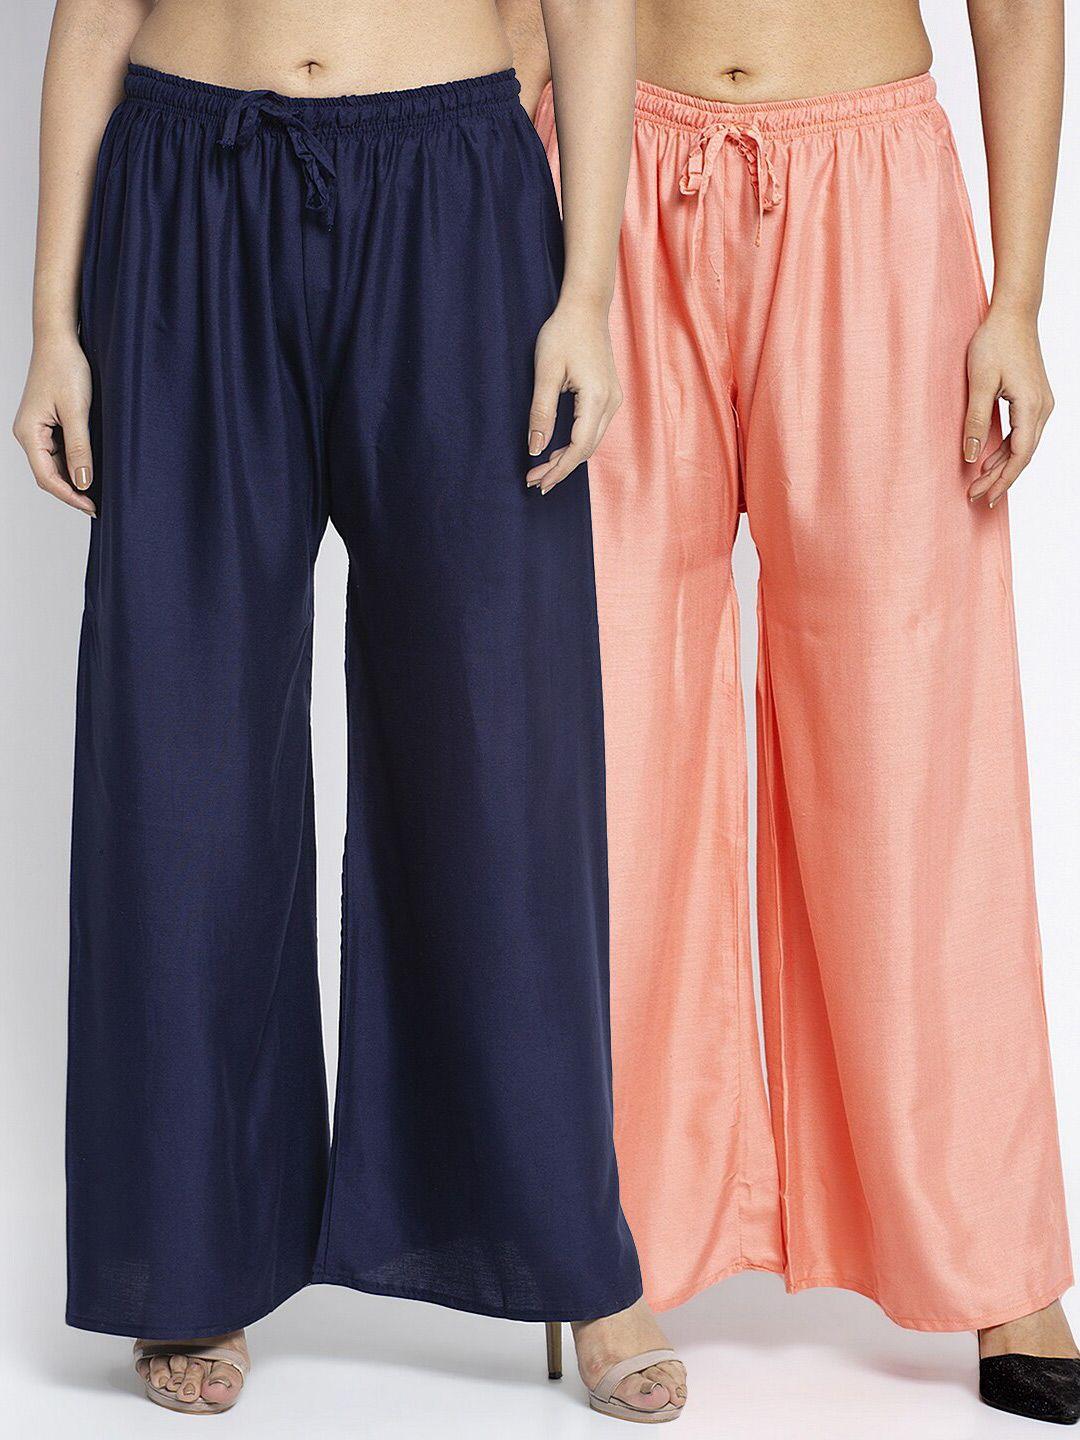 gracit women pack of 2 navy blue & peach-coloured ethnic palazzos